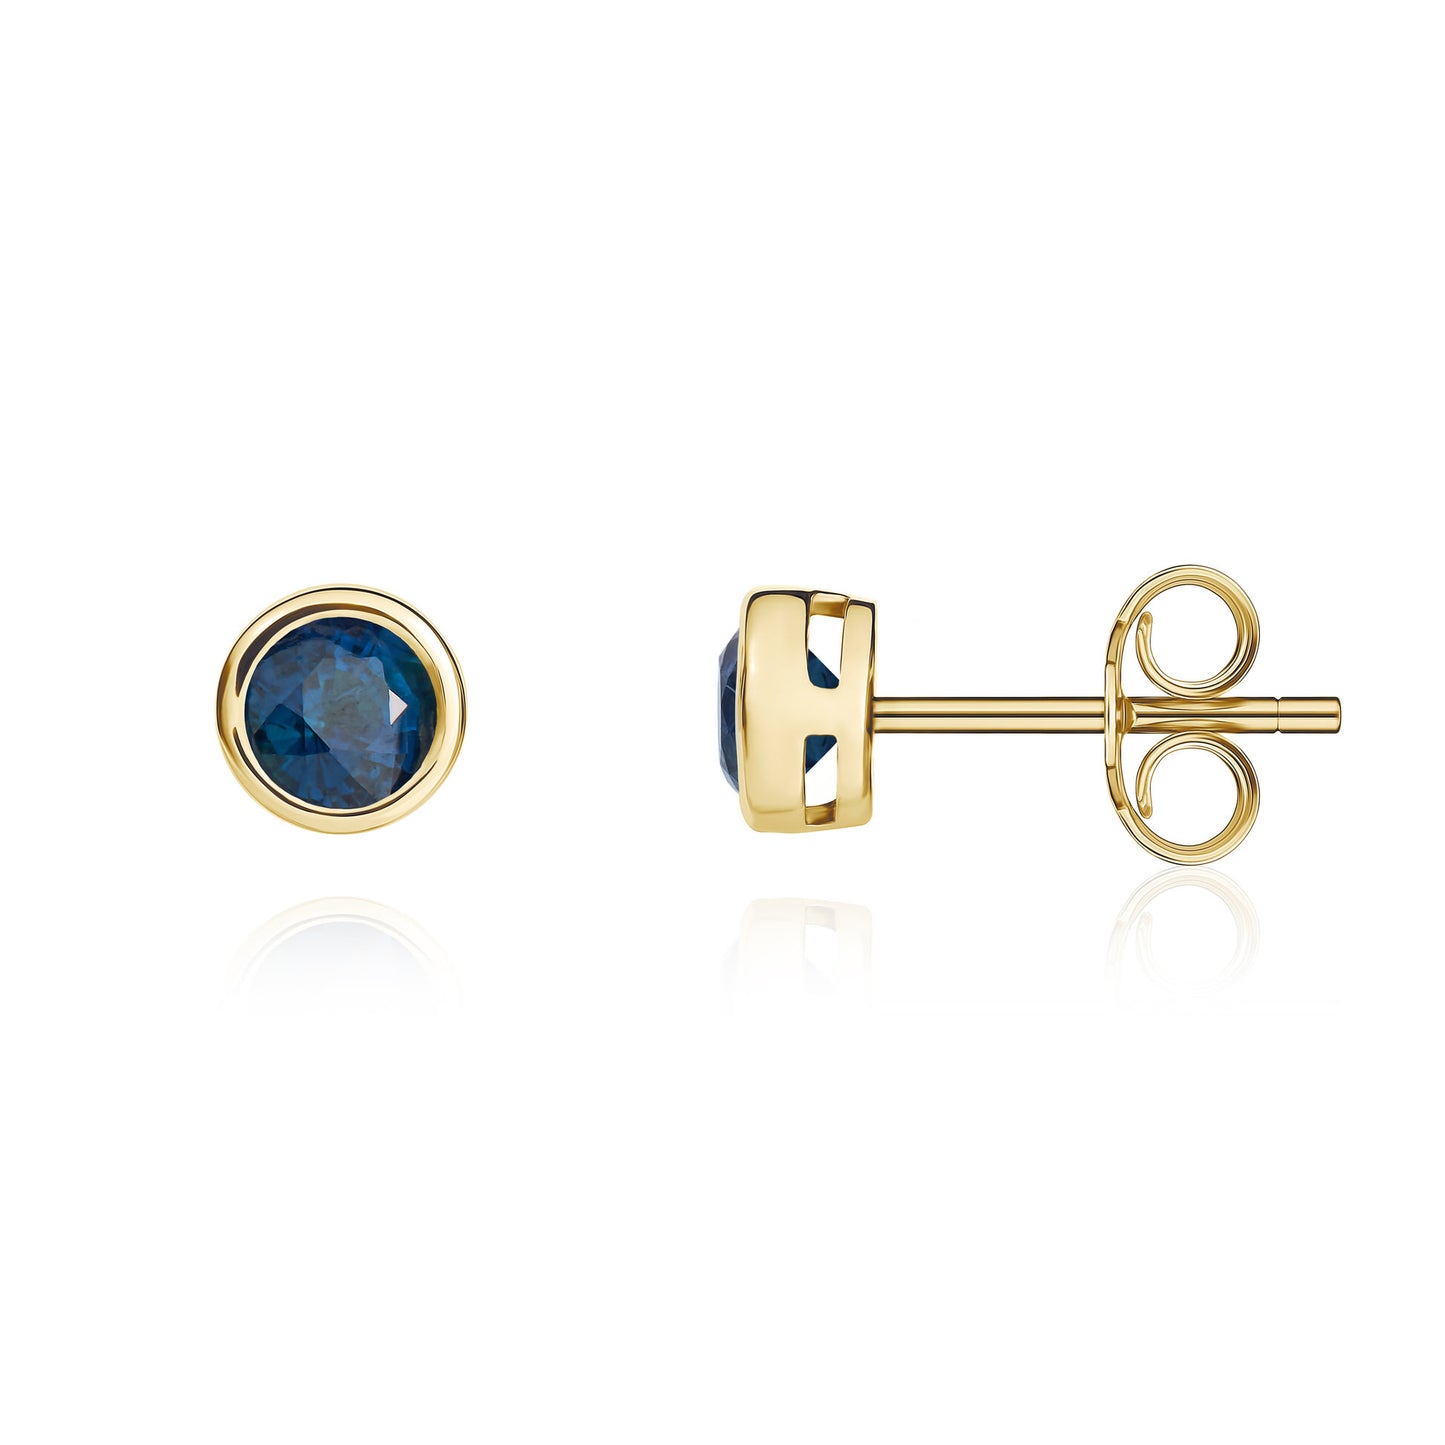 9K Yellow Gold 4mm Round Sapphire Stud Earrings